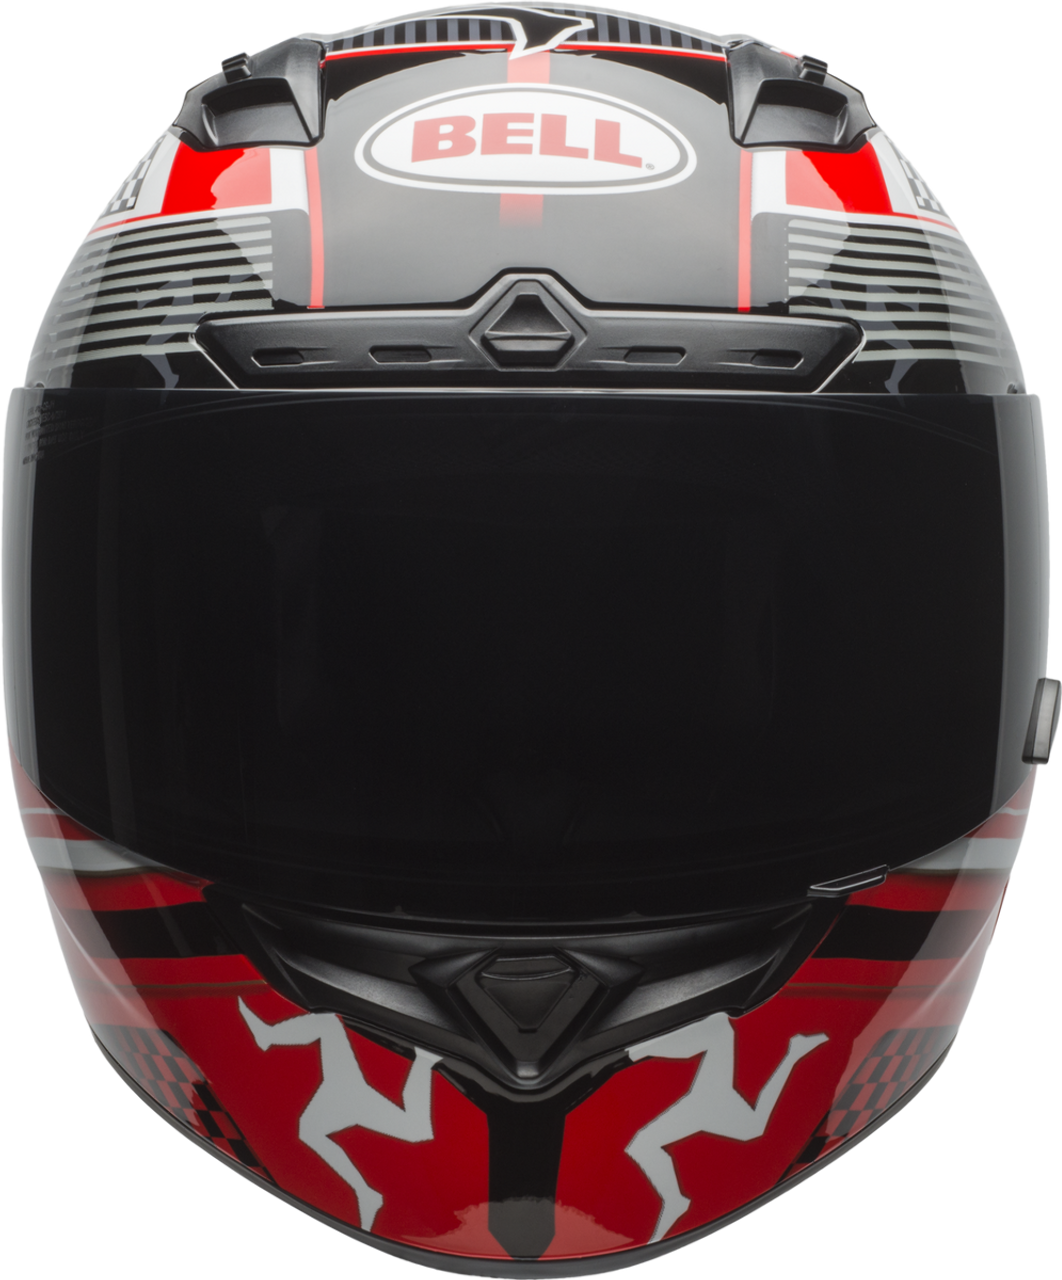 BELL QUALIFIER DLX MIPS ISLE OF MAN 18 GLOSS BLACK/RED